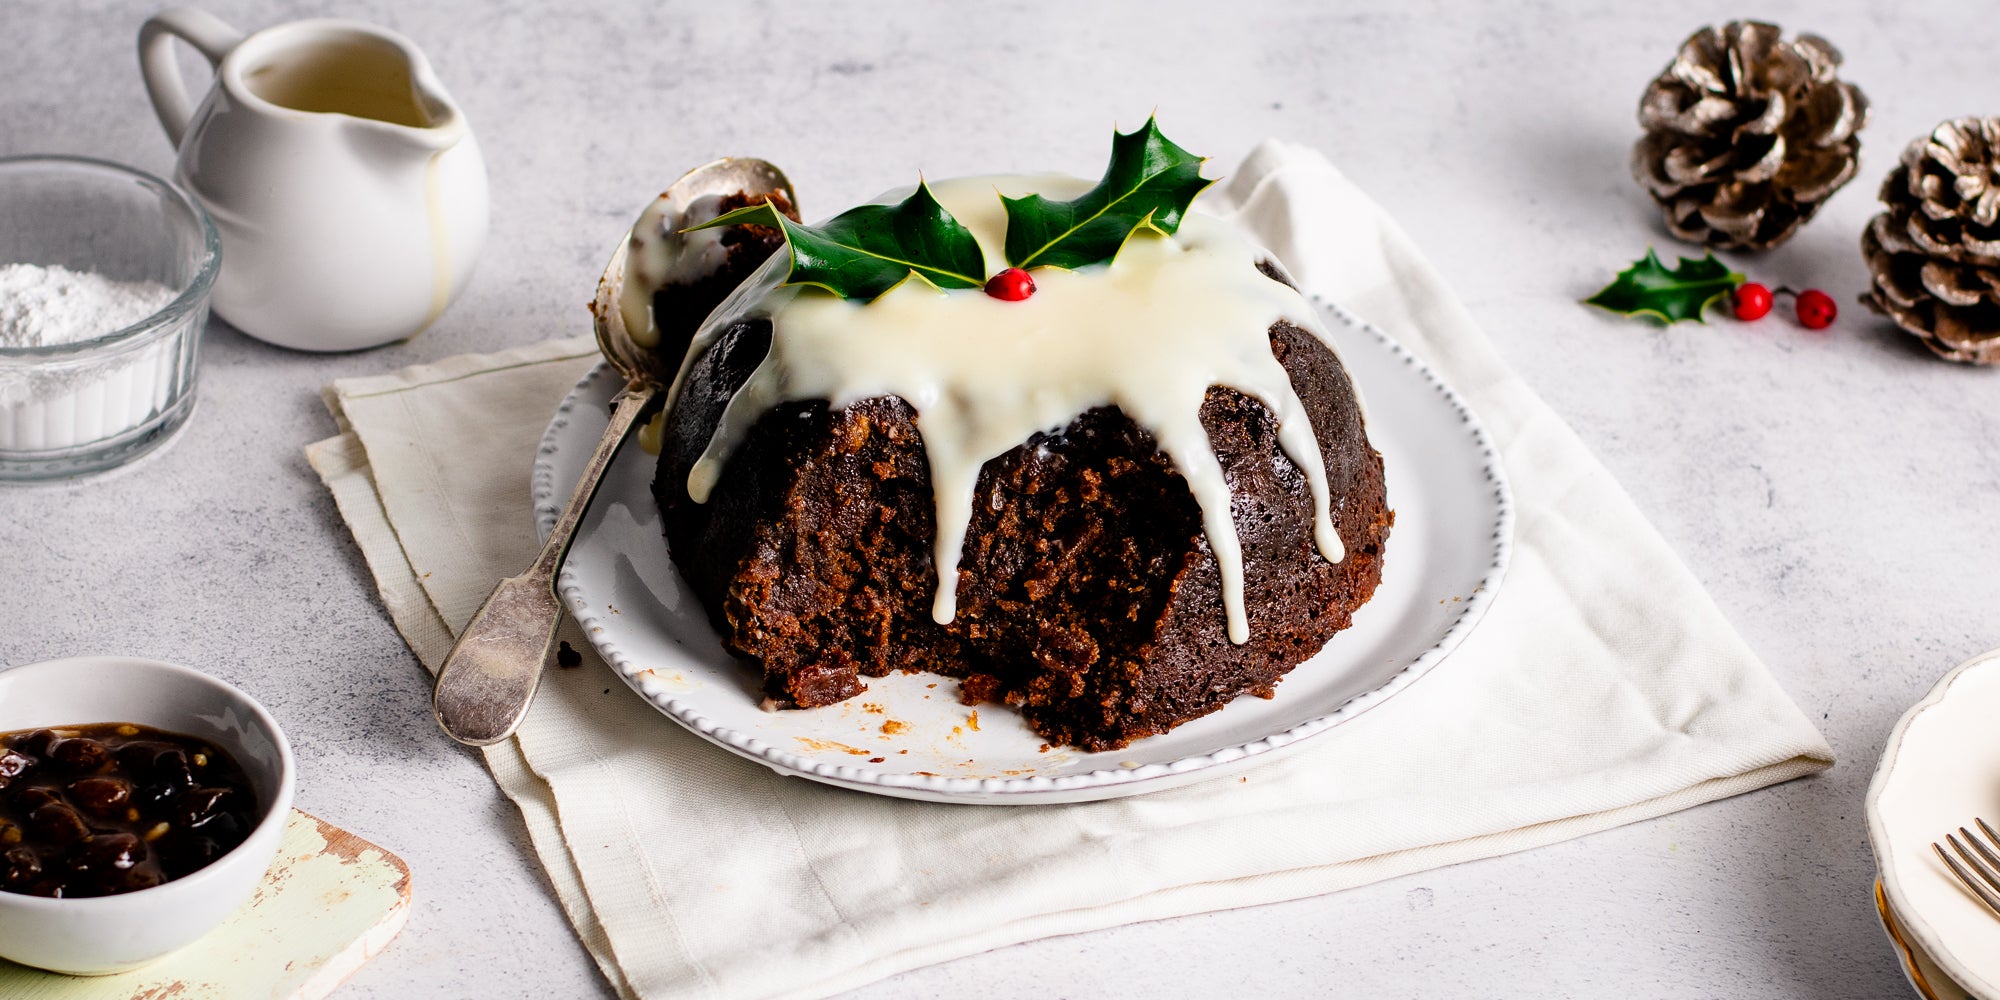 Last Minute Christmas Pudding with a slice taken out of it, showing the insides, with drizzles of cream or brandy butter